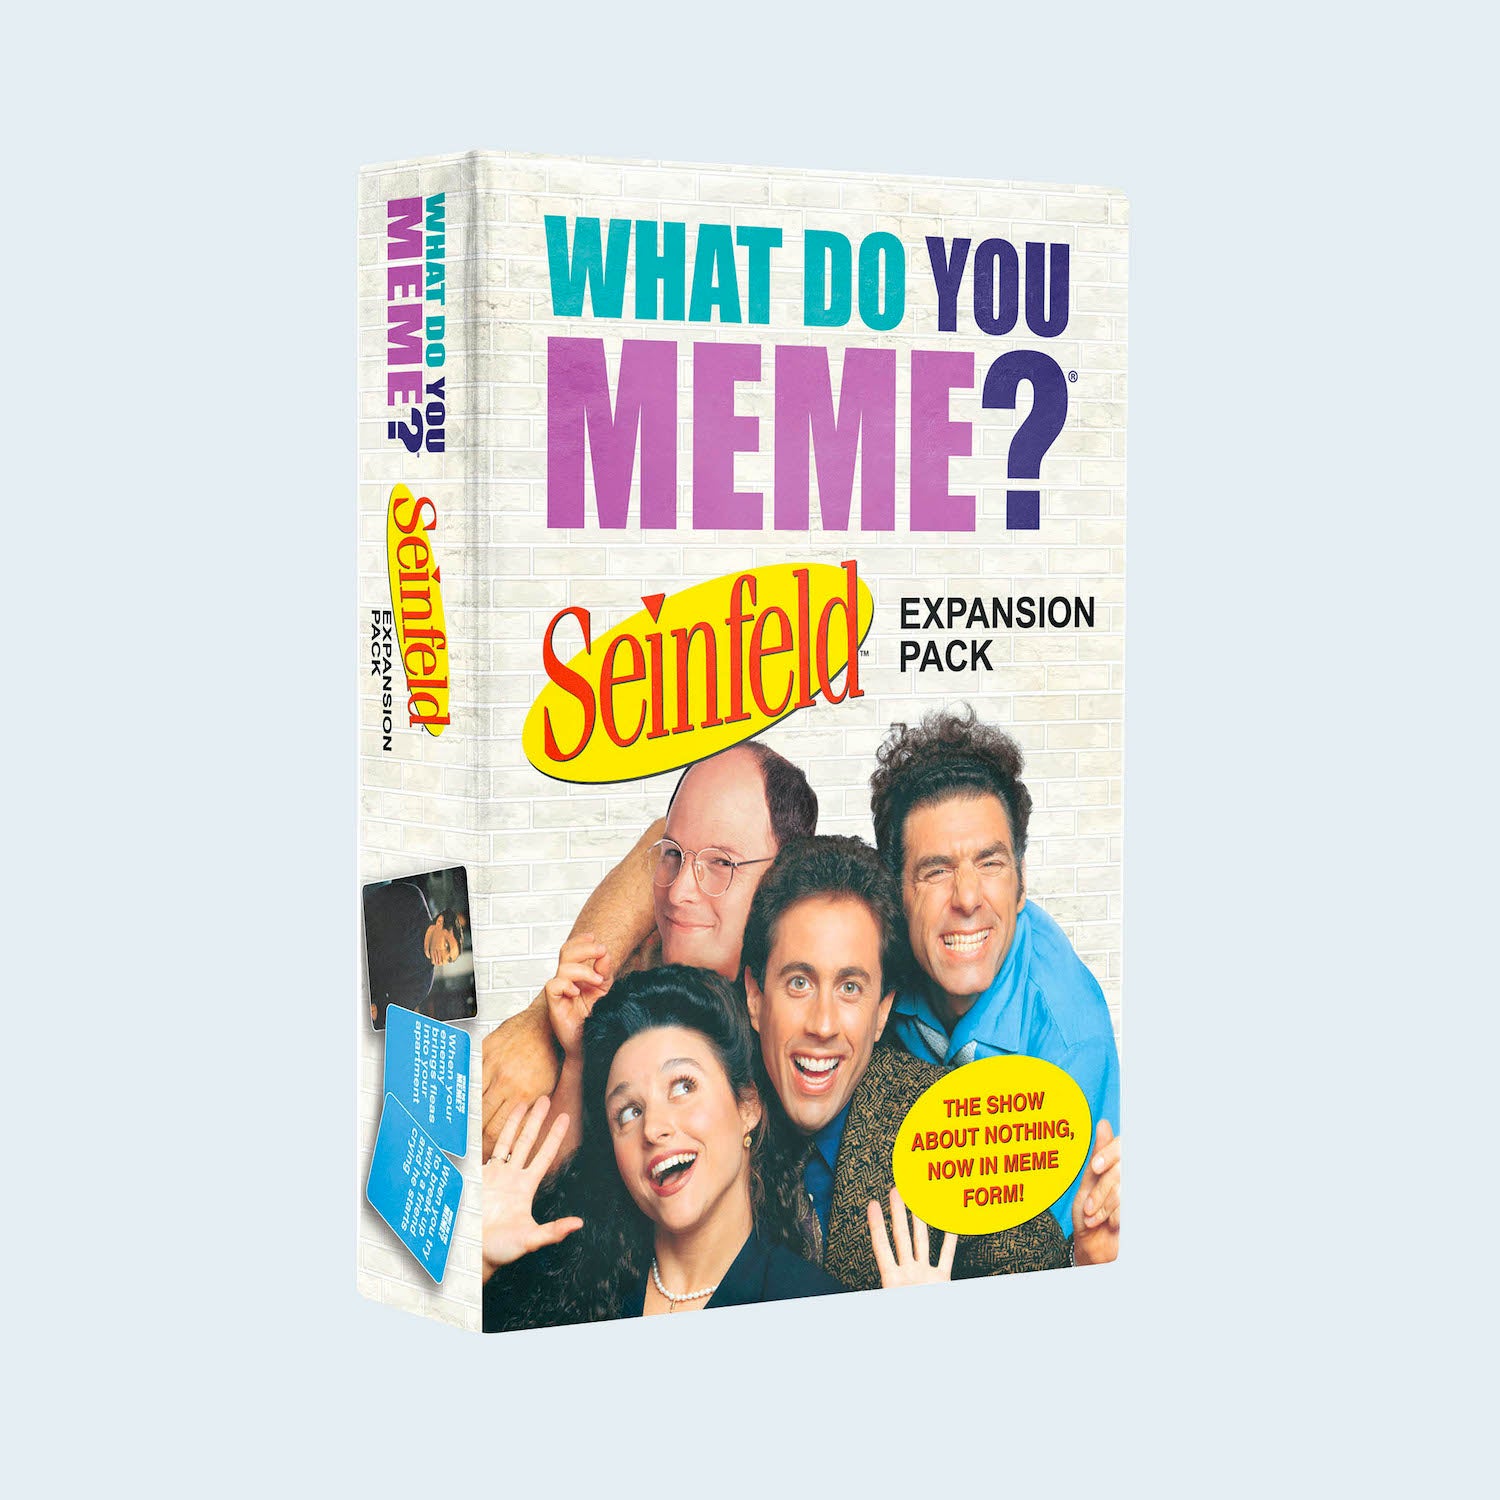 what-do-you-meme-seinfeld-expansion-pack-game-box-and-game-play-02-what-do-you-meme-by-relatable